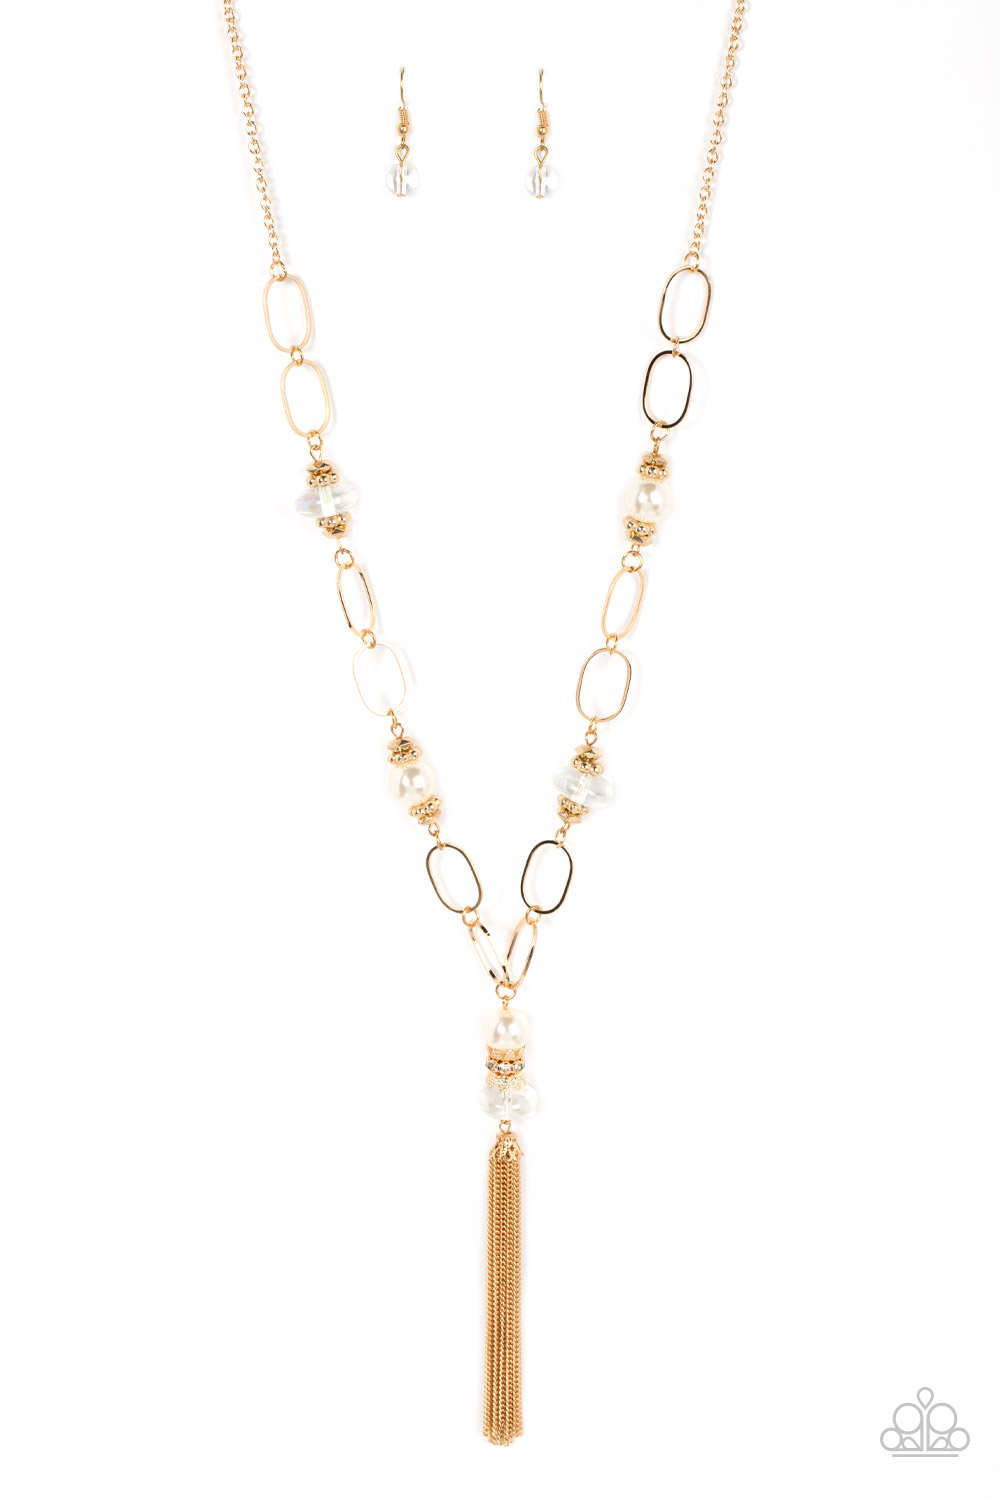 Necklace - Taken with Tassels - Gold